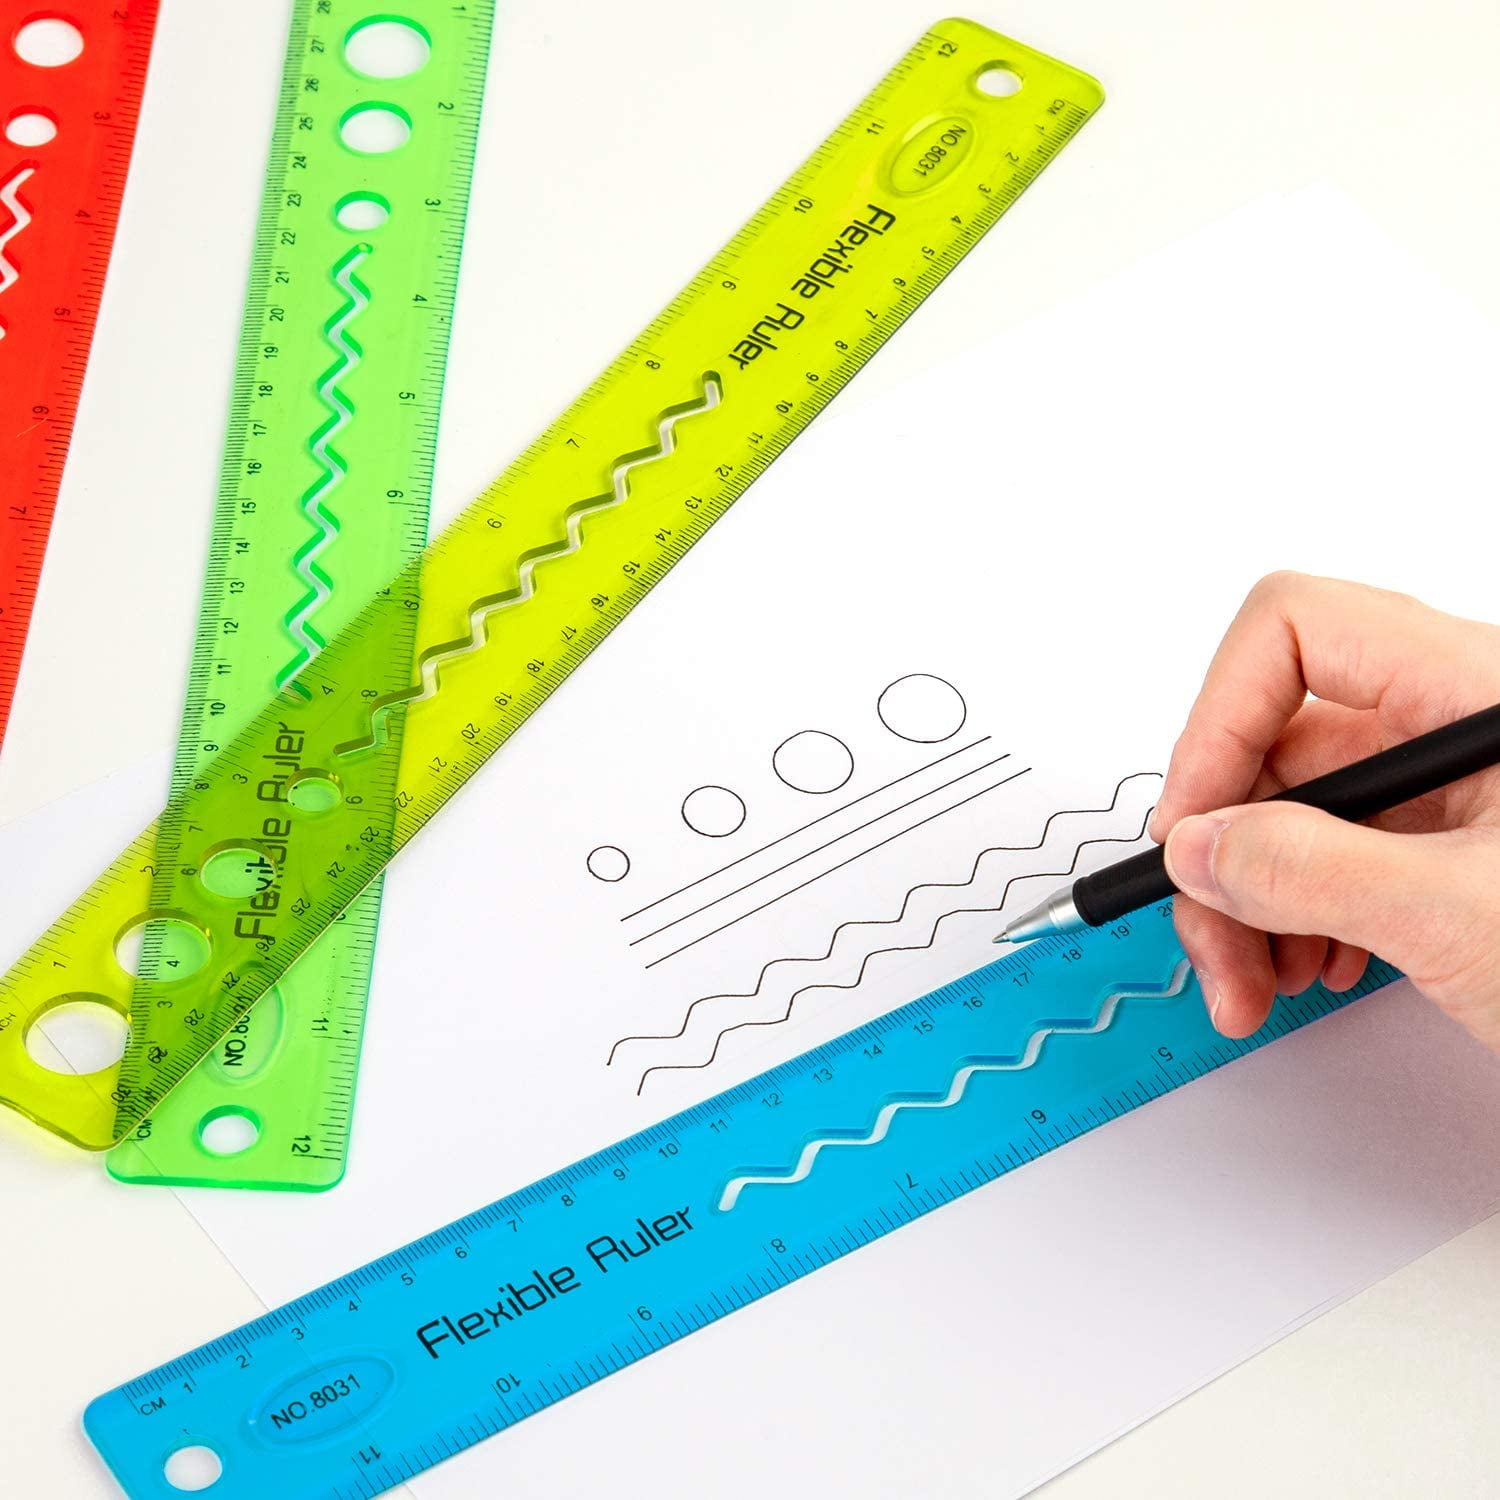 Enday Flexible Ruler Soft Plastic Rulers for Kids and Adults School Office Supplies 12 inch Red